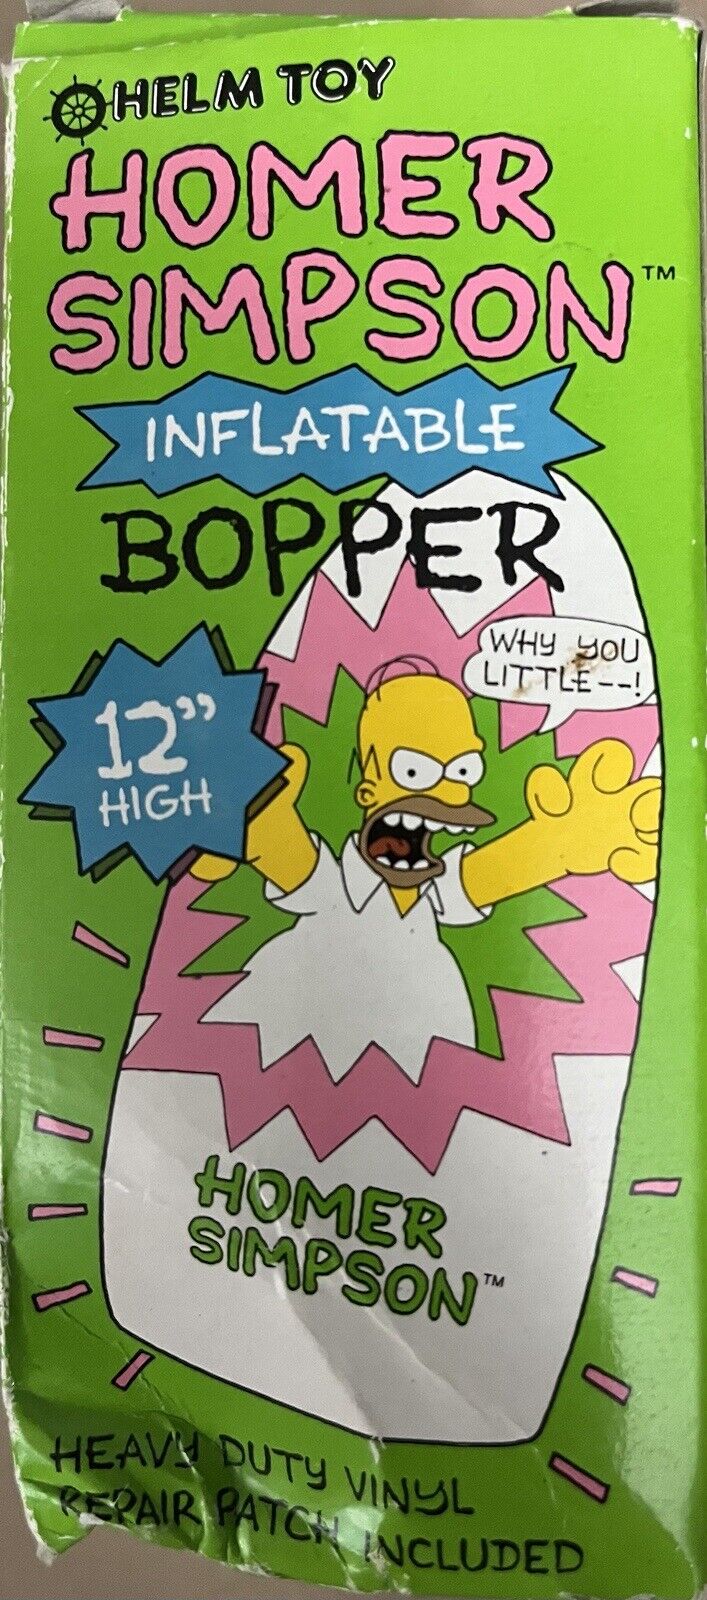 1990 The Simpsons HOMER SIMPSON 12” HIGH INFLATABLE BOPPER Vintage NEW